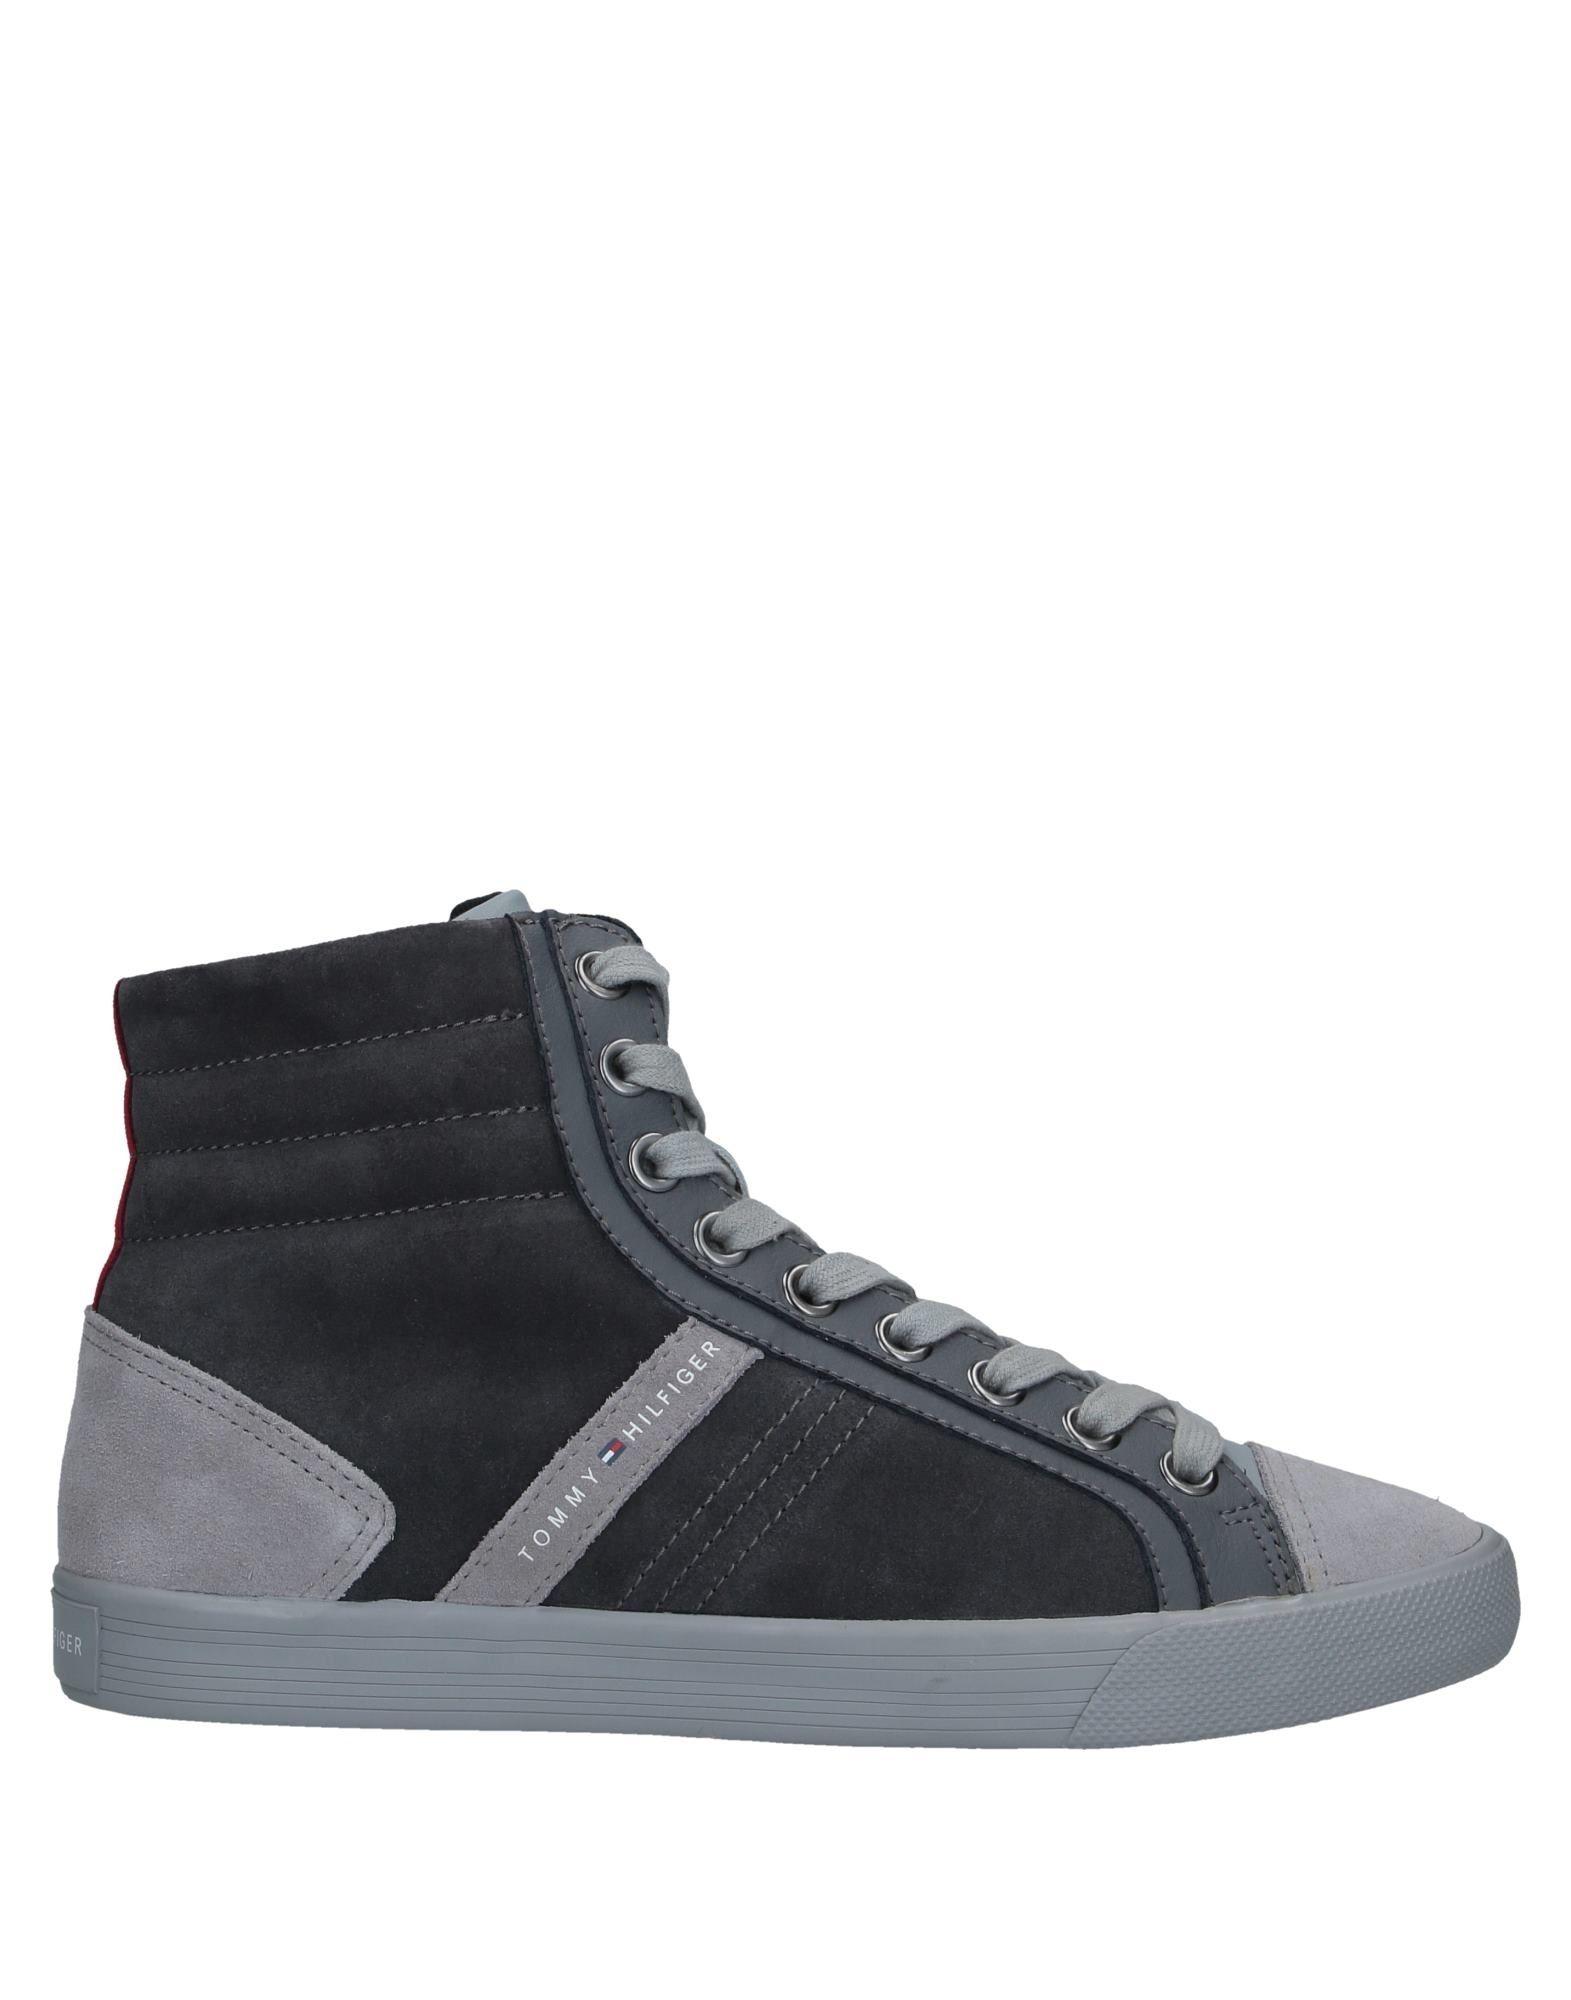 Tommy Hilfiger High-tops & Sneakers in Gray for Men - Lyst